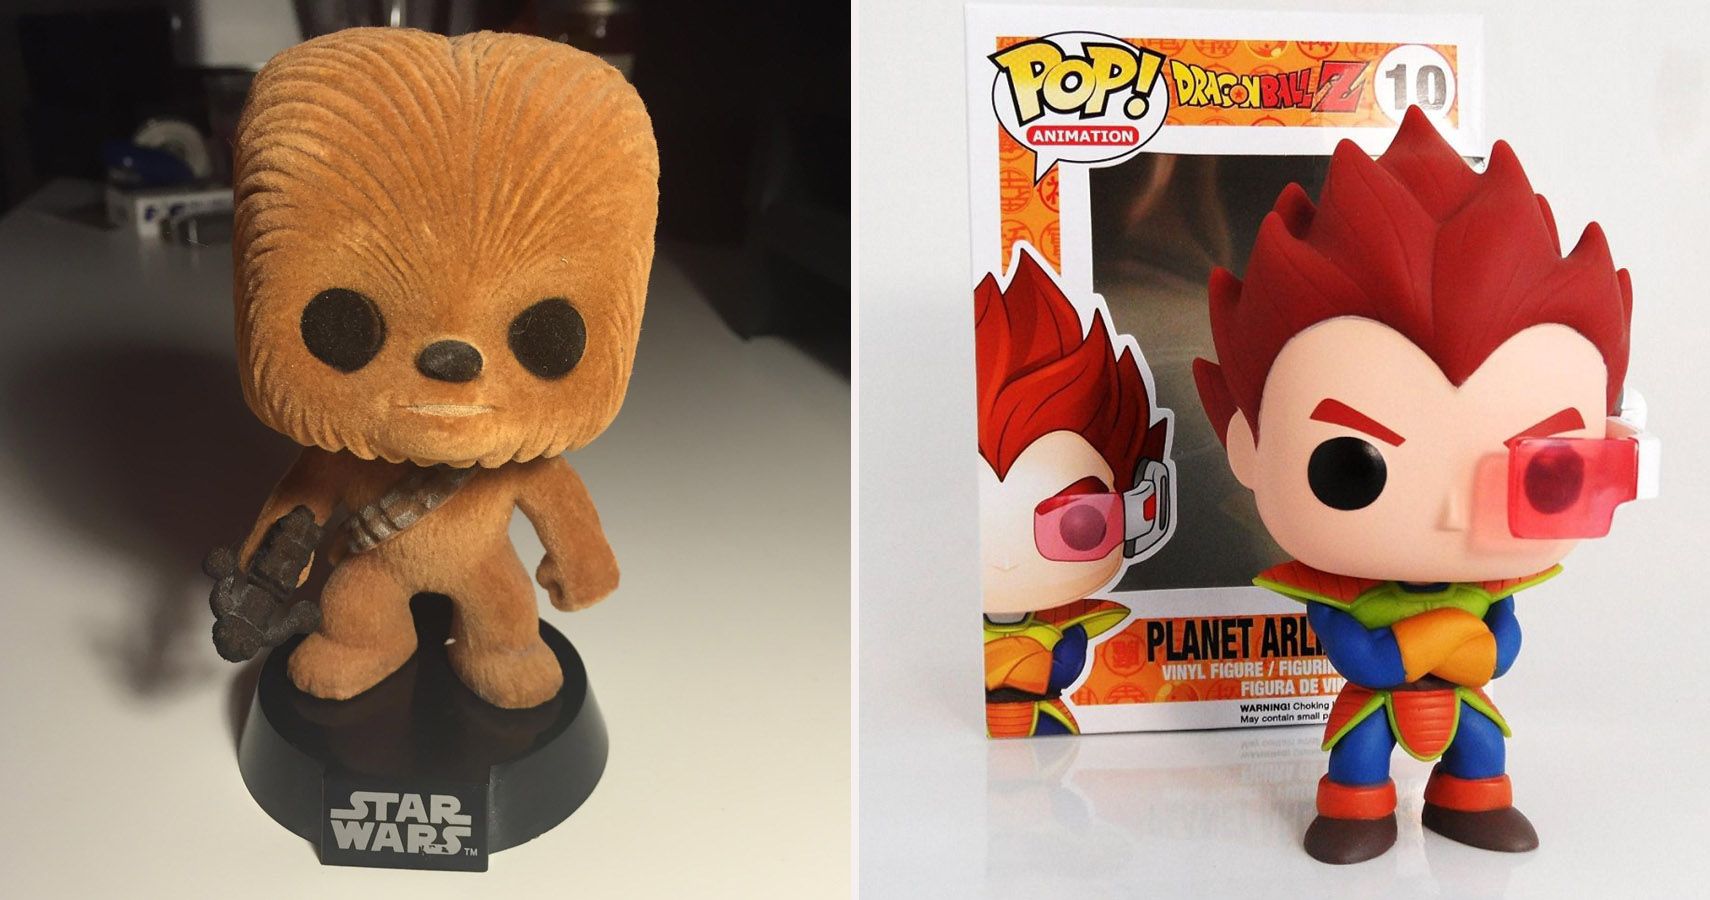 Top-20 Most Valuable Non-Freddy Funko Pop! Figures - Pop Price Guide